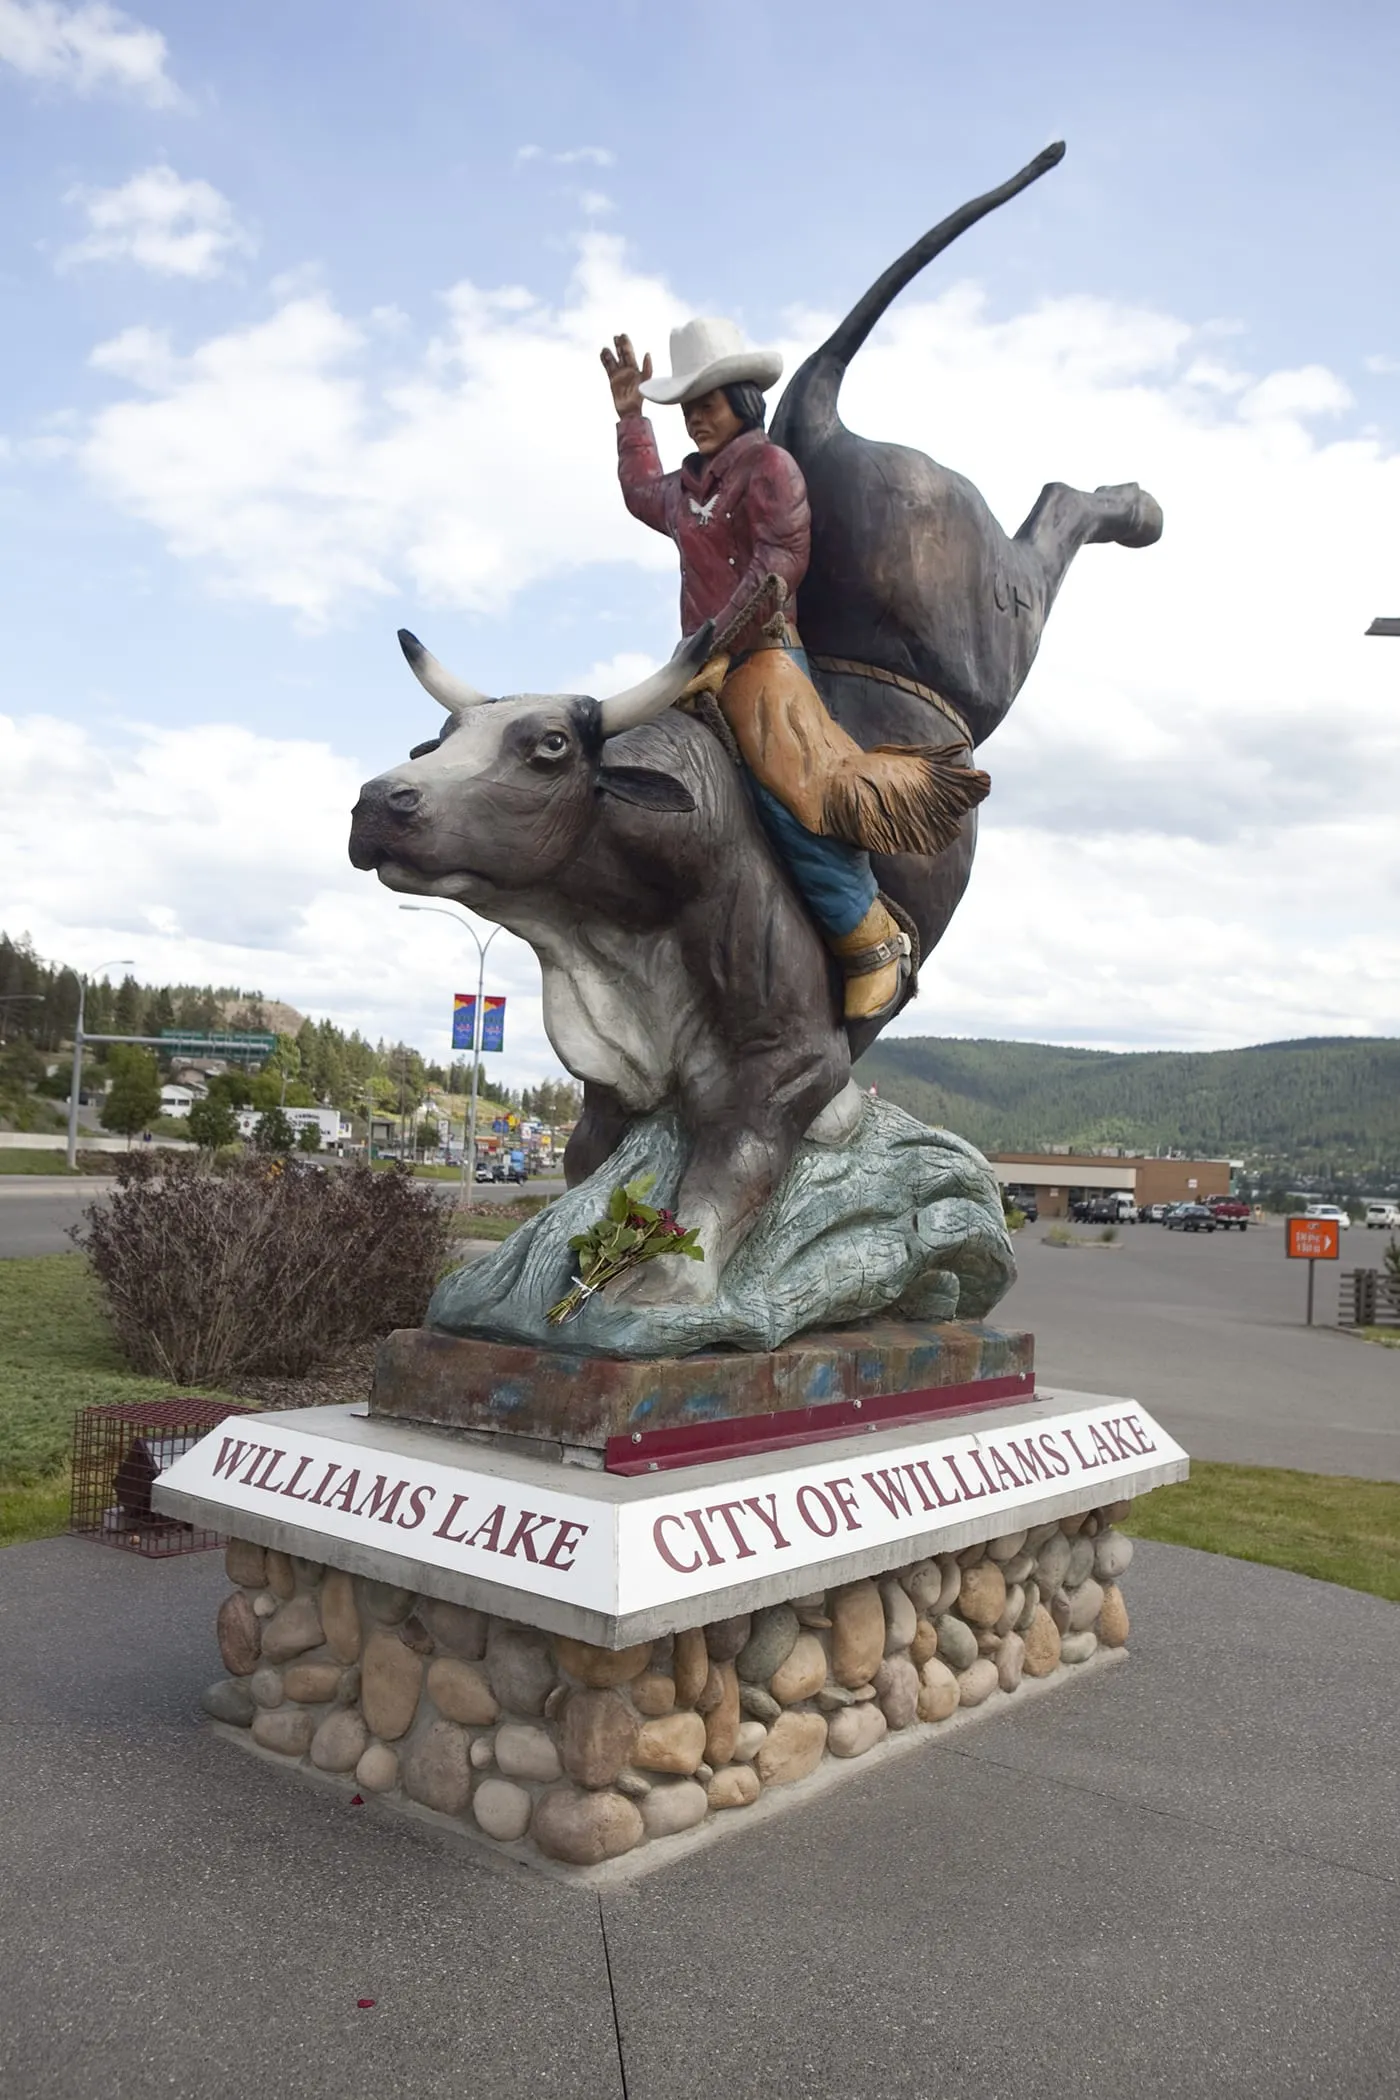 Heart of a Champion - Gerry James Palmantier cowboy statue  in Williams Lake, British Columbia, Canada.